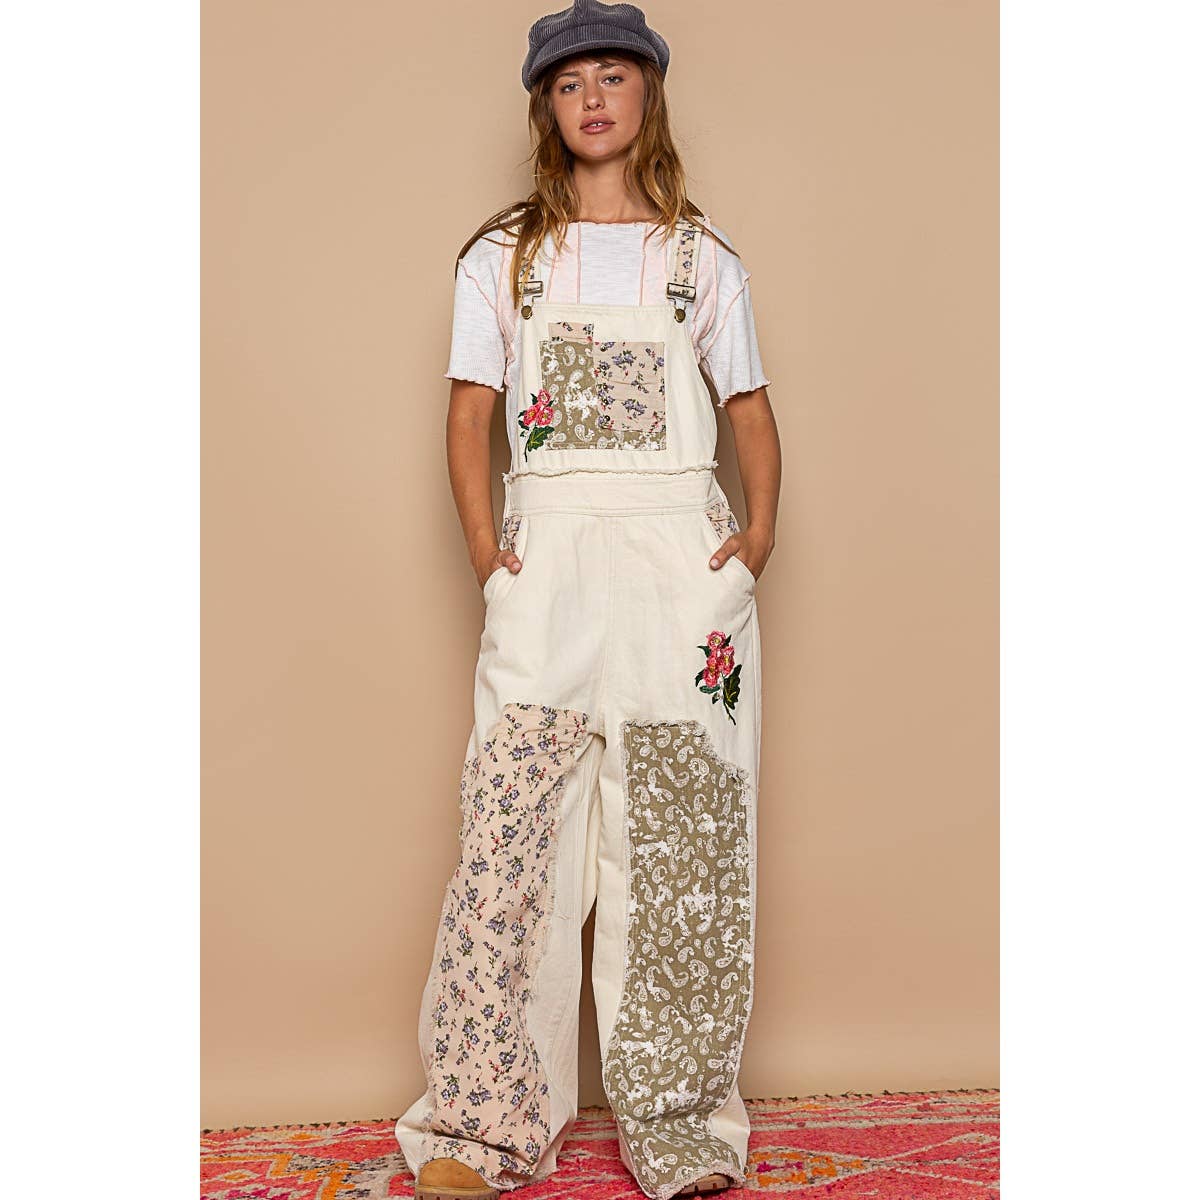 The Dolly Overalls